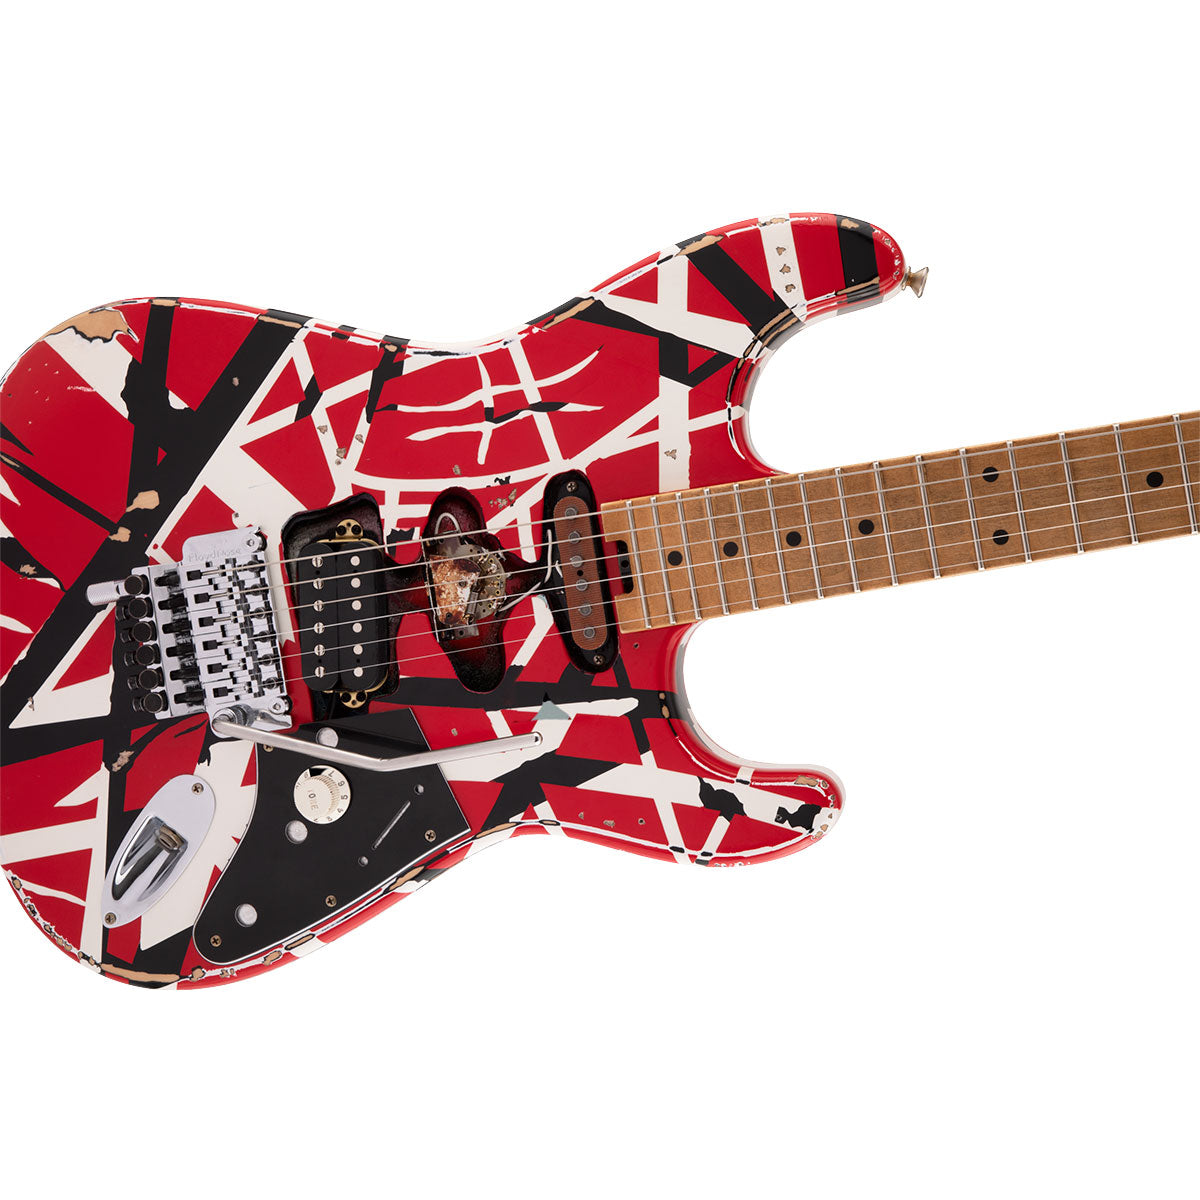 Close-up top view of EVH Striped Series Frankenstein Frankie Electric Guitar showing body and portion of fretboard